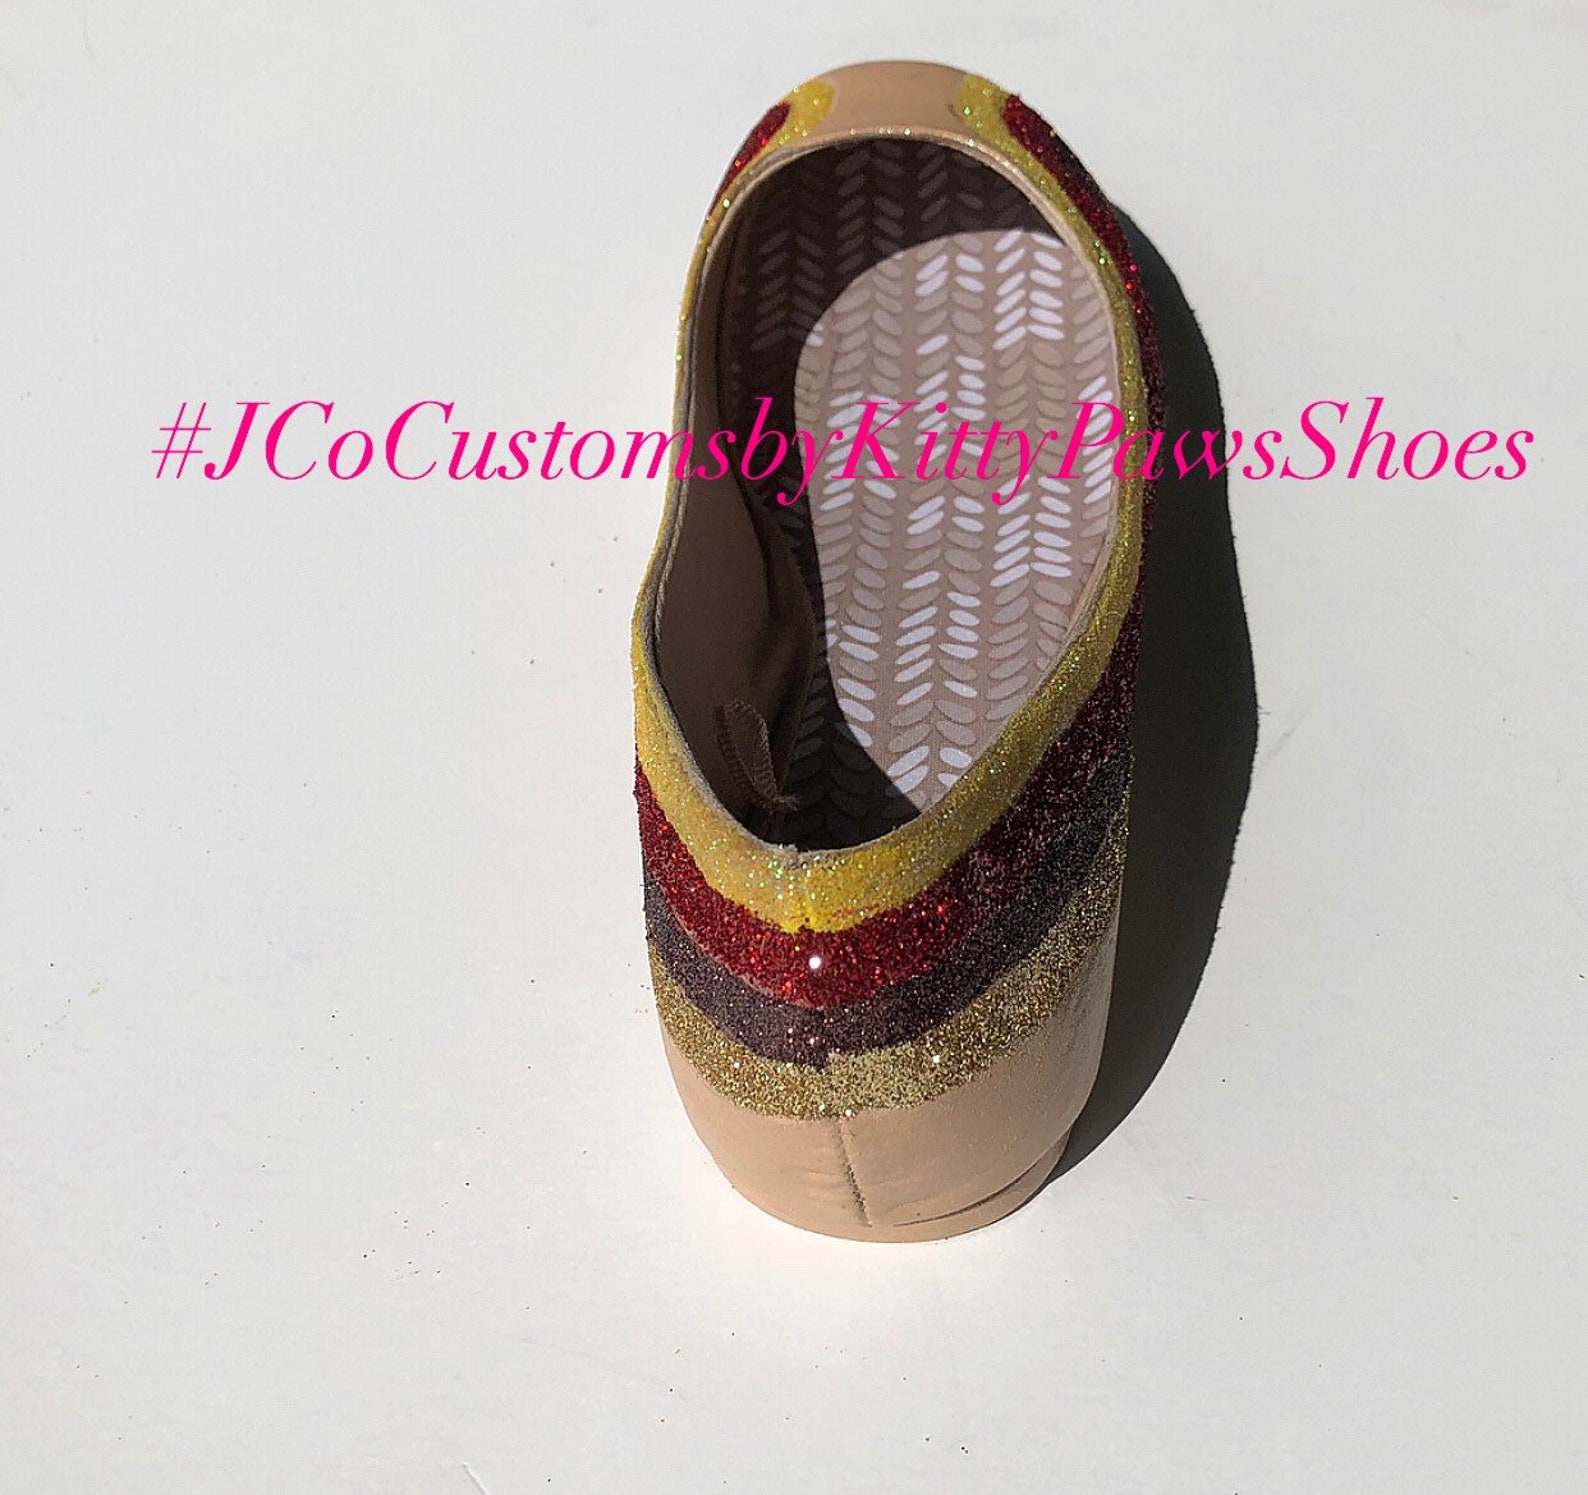 ballet flat women's custom gold red brown & champagne glitter striped flats *free u.s. shipping* jco.customs by kitty paws s